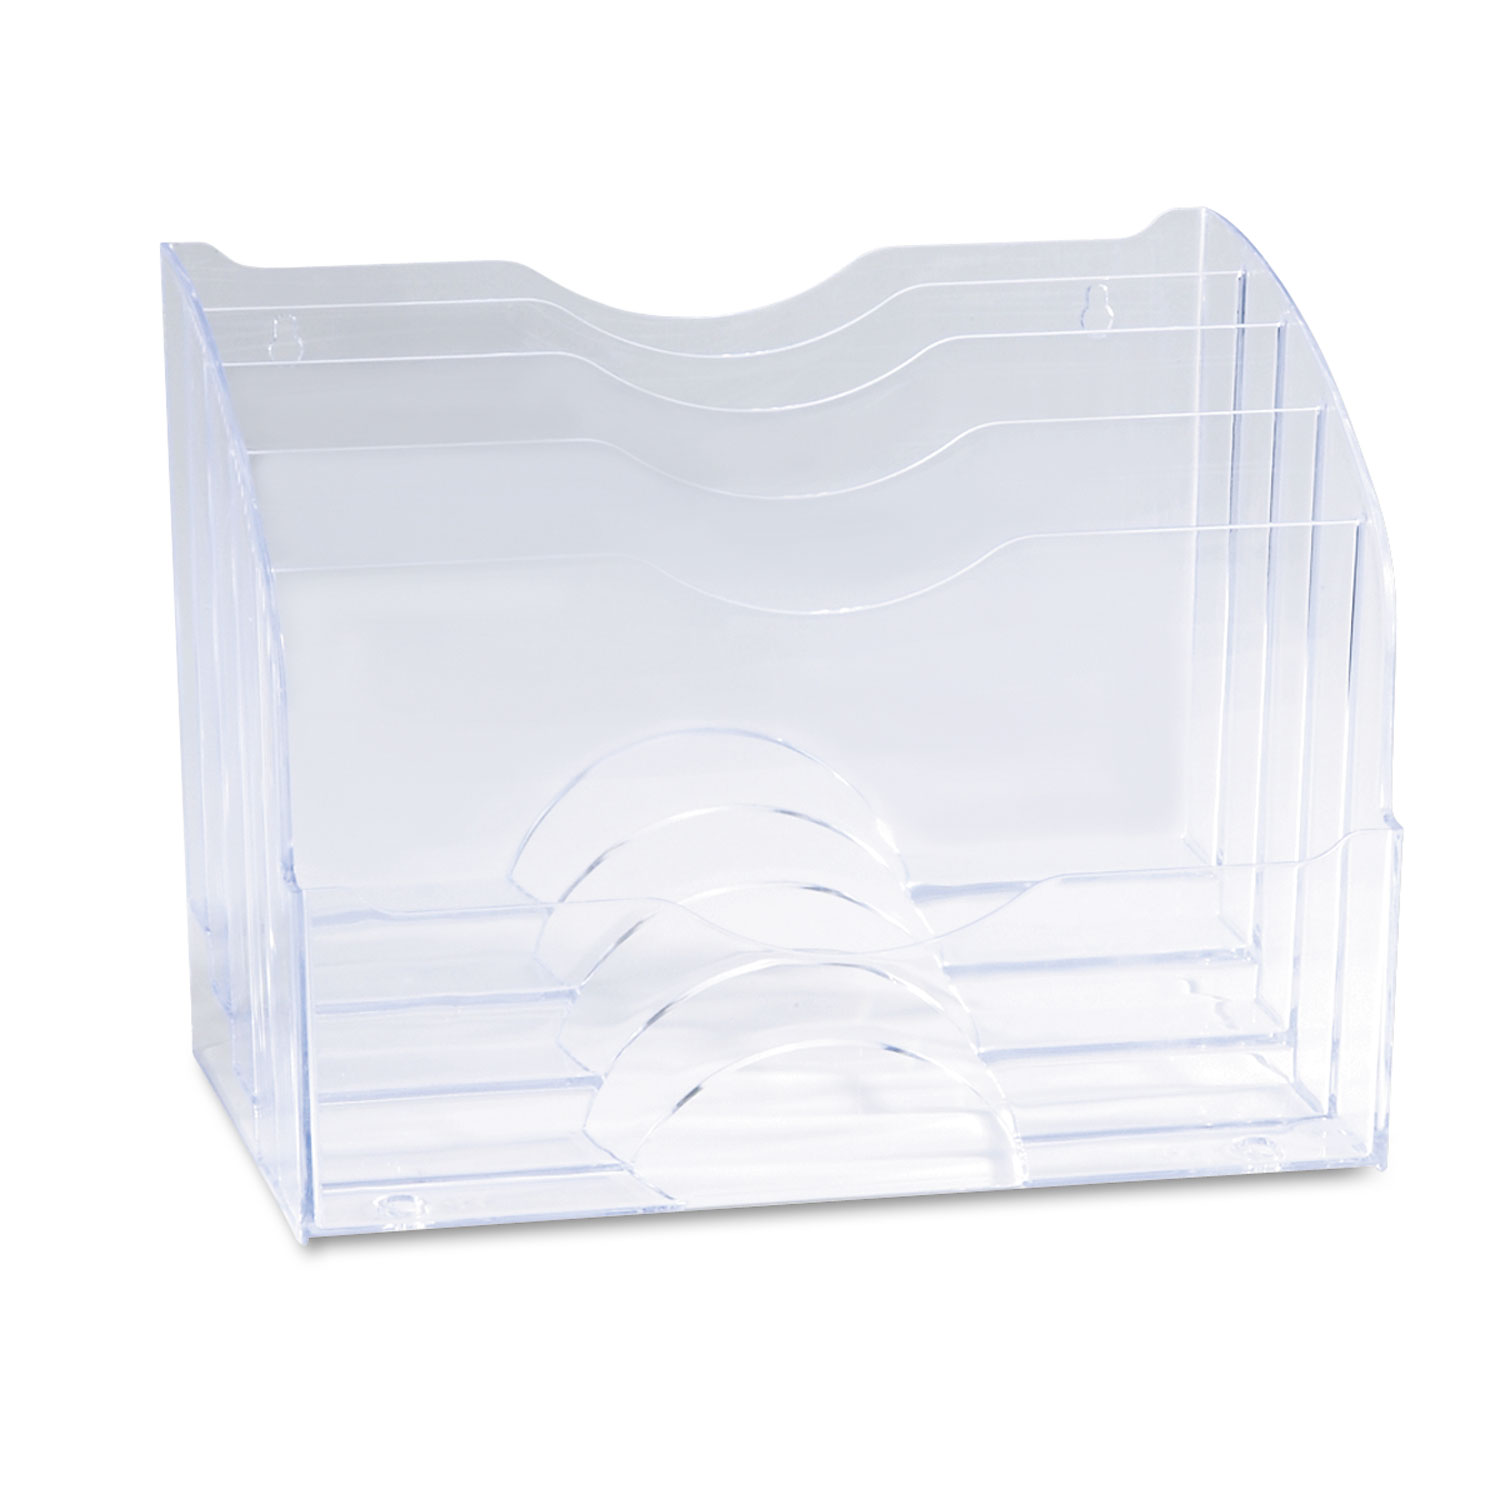 Two-Way Organizer, Five Sections, Plastic, 8 3/4 x 10 3/8 x 13 5/8, Clear